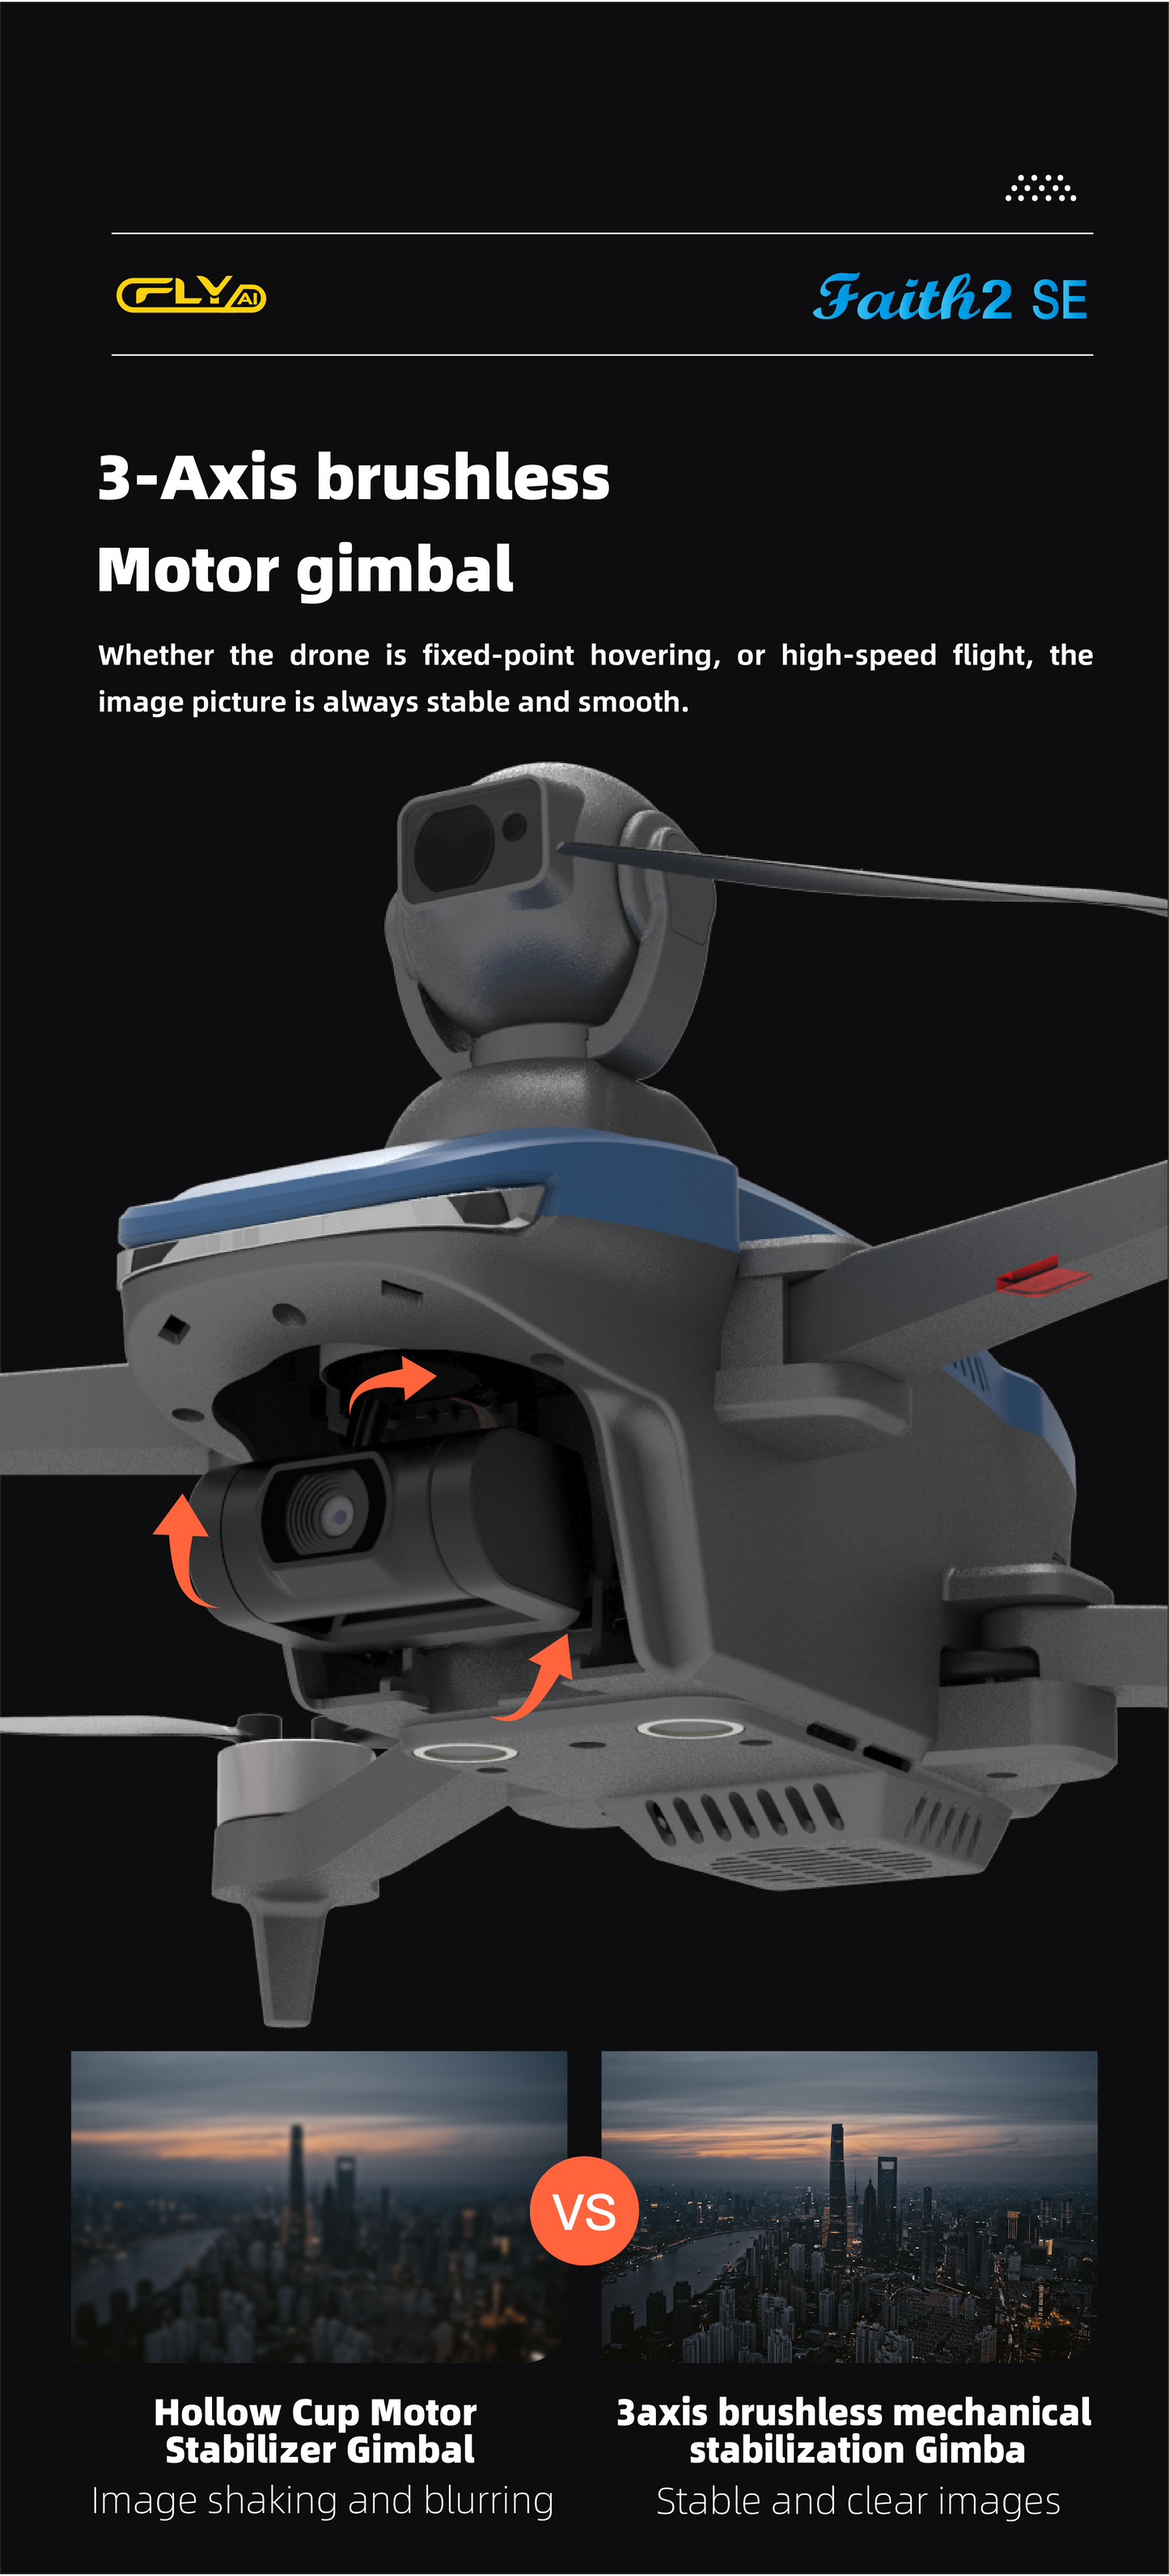 FLY Ai Faith 2 SE Drone: 4K Cinematic Flyer with Ai 540° Obstacle Avoidance and Advanced GPS Navigation